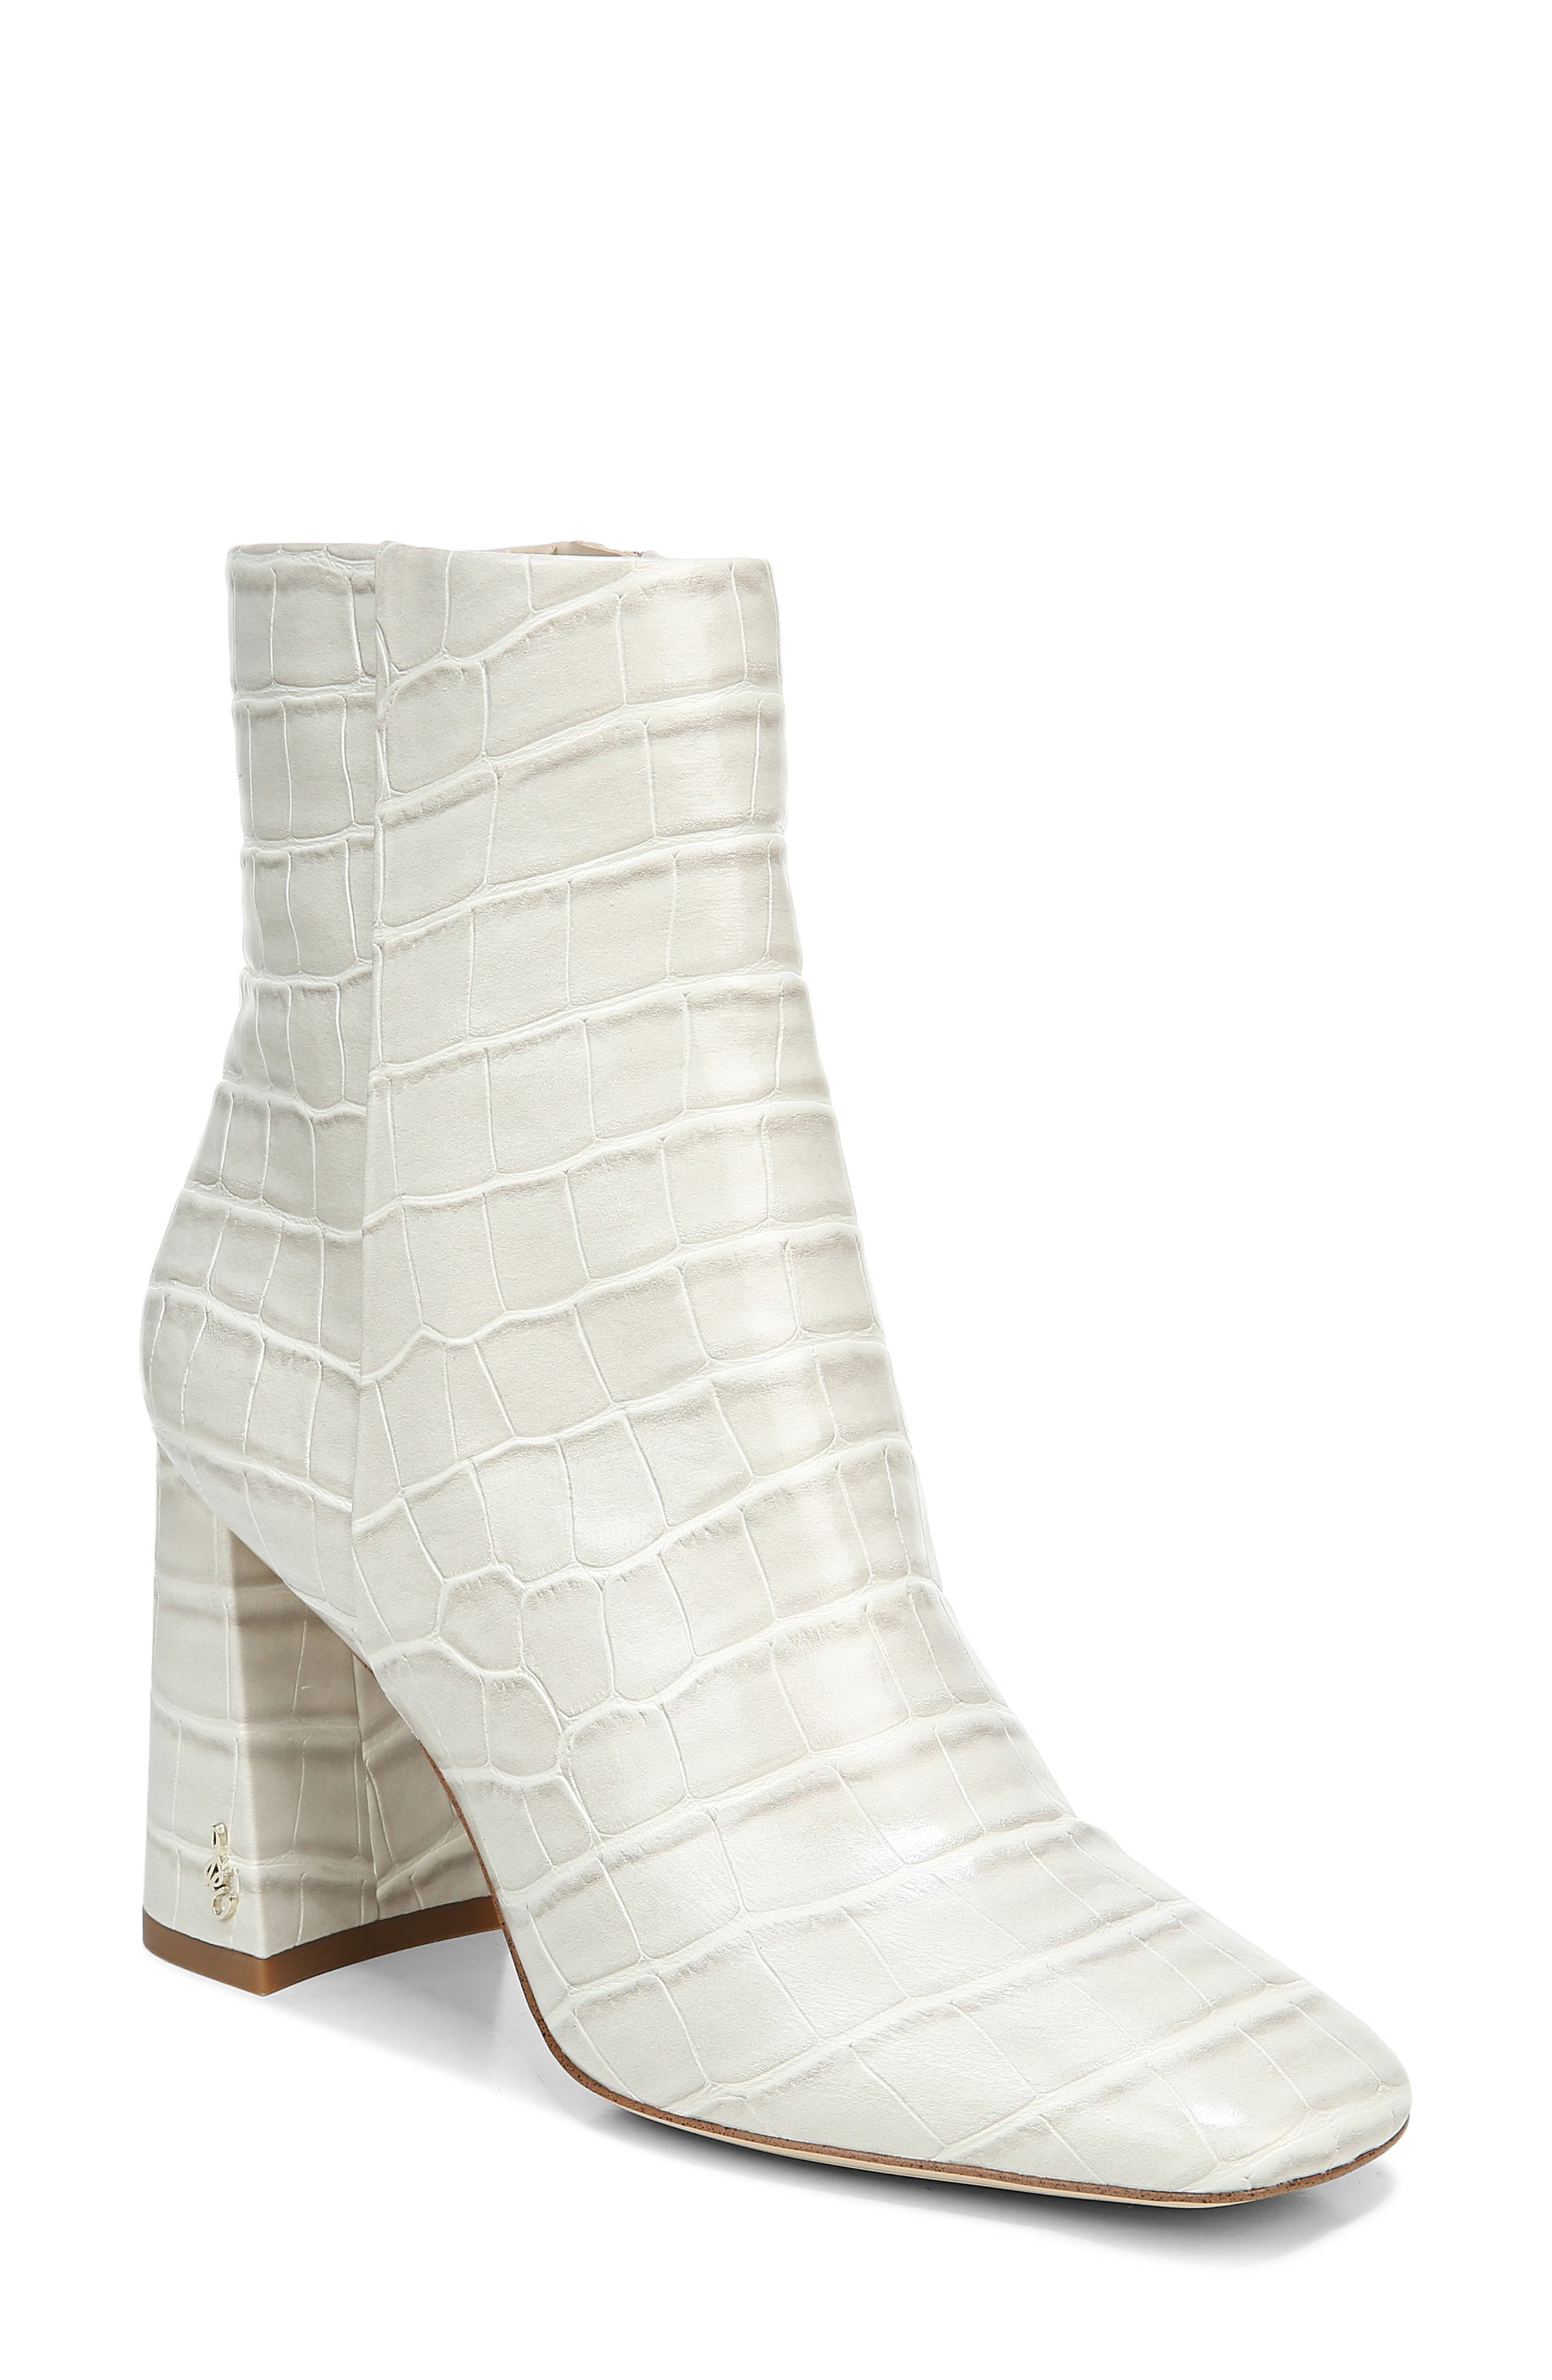 Women's Offwhite Booties \u0026 Ankle Boots 